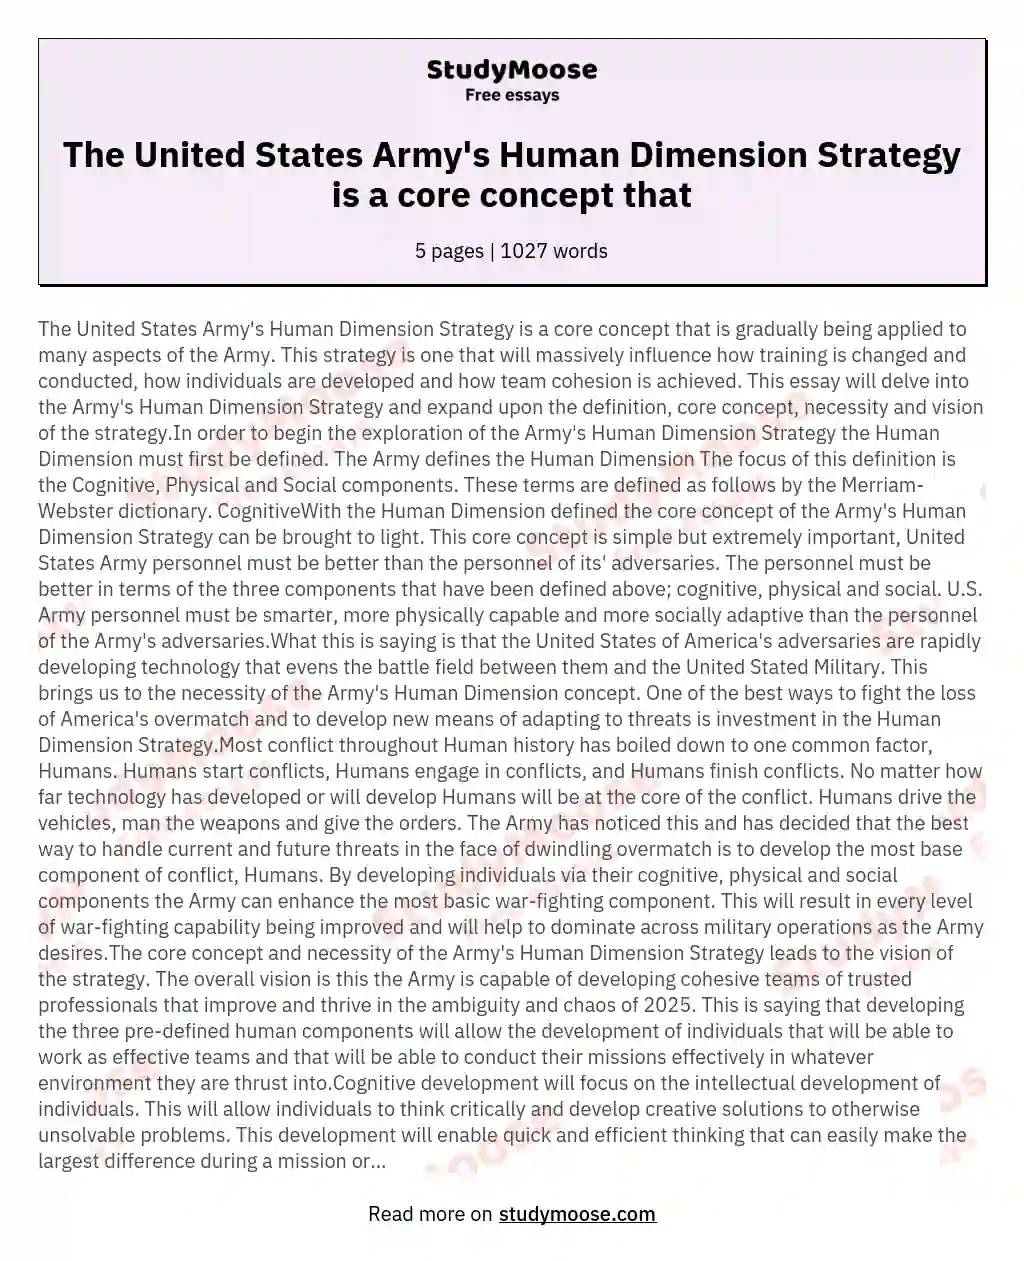 The United States Army's Human Dimension Strategy is a core concept that